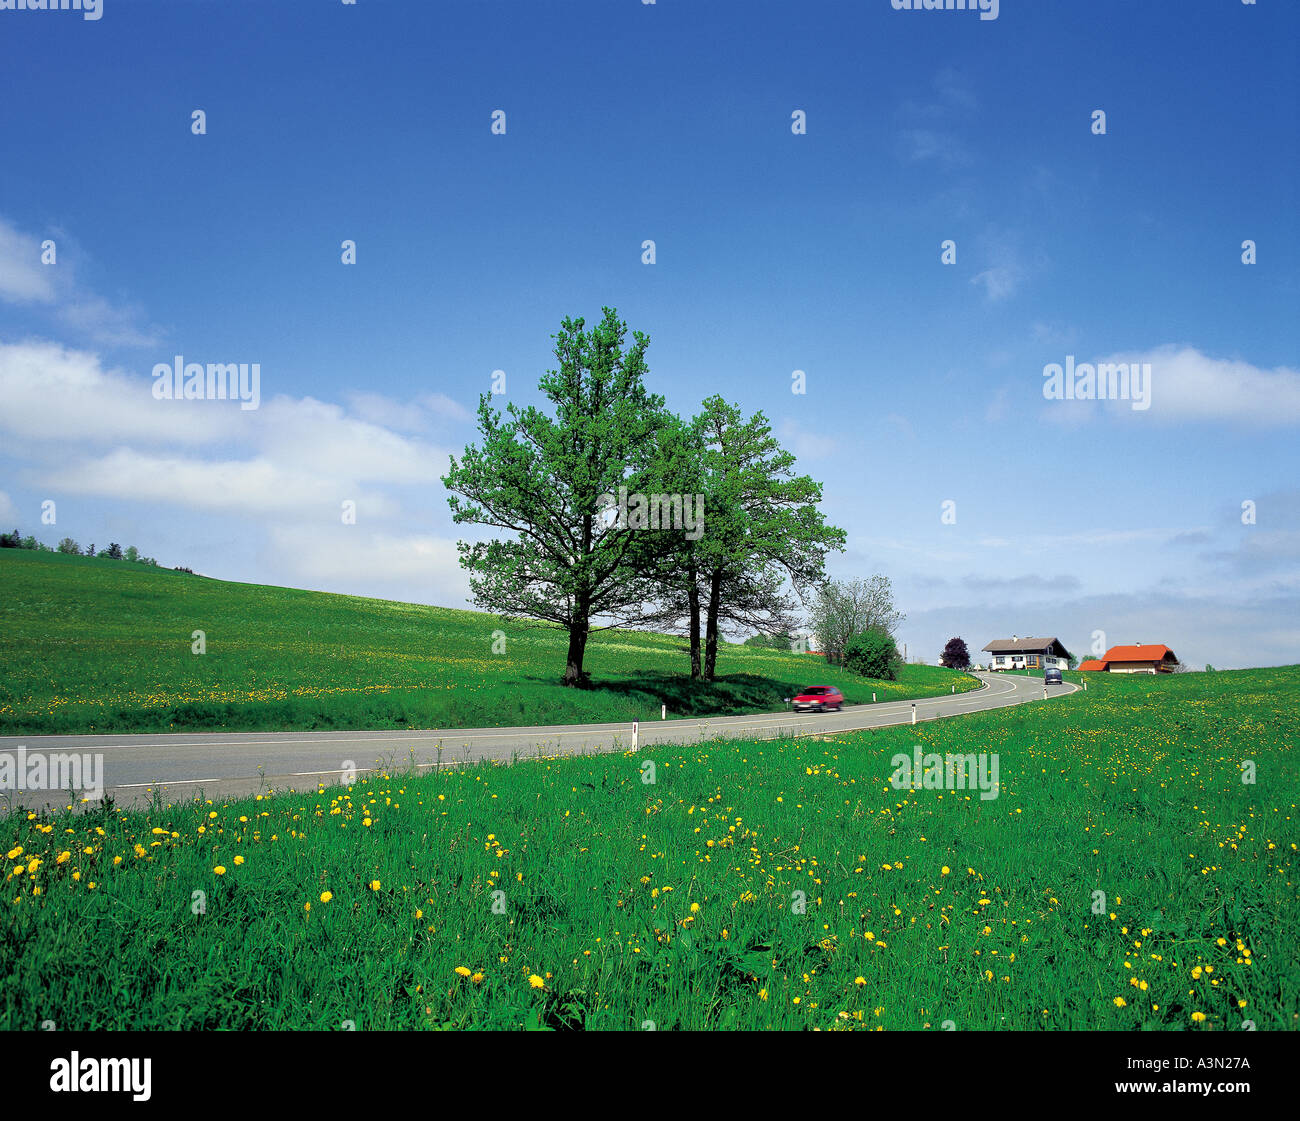 Road Landscapes Nature Cars Trees Flowers Sky Building Fields Houses Dandelions Stock Photo